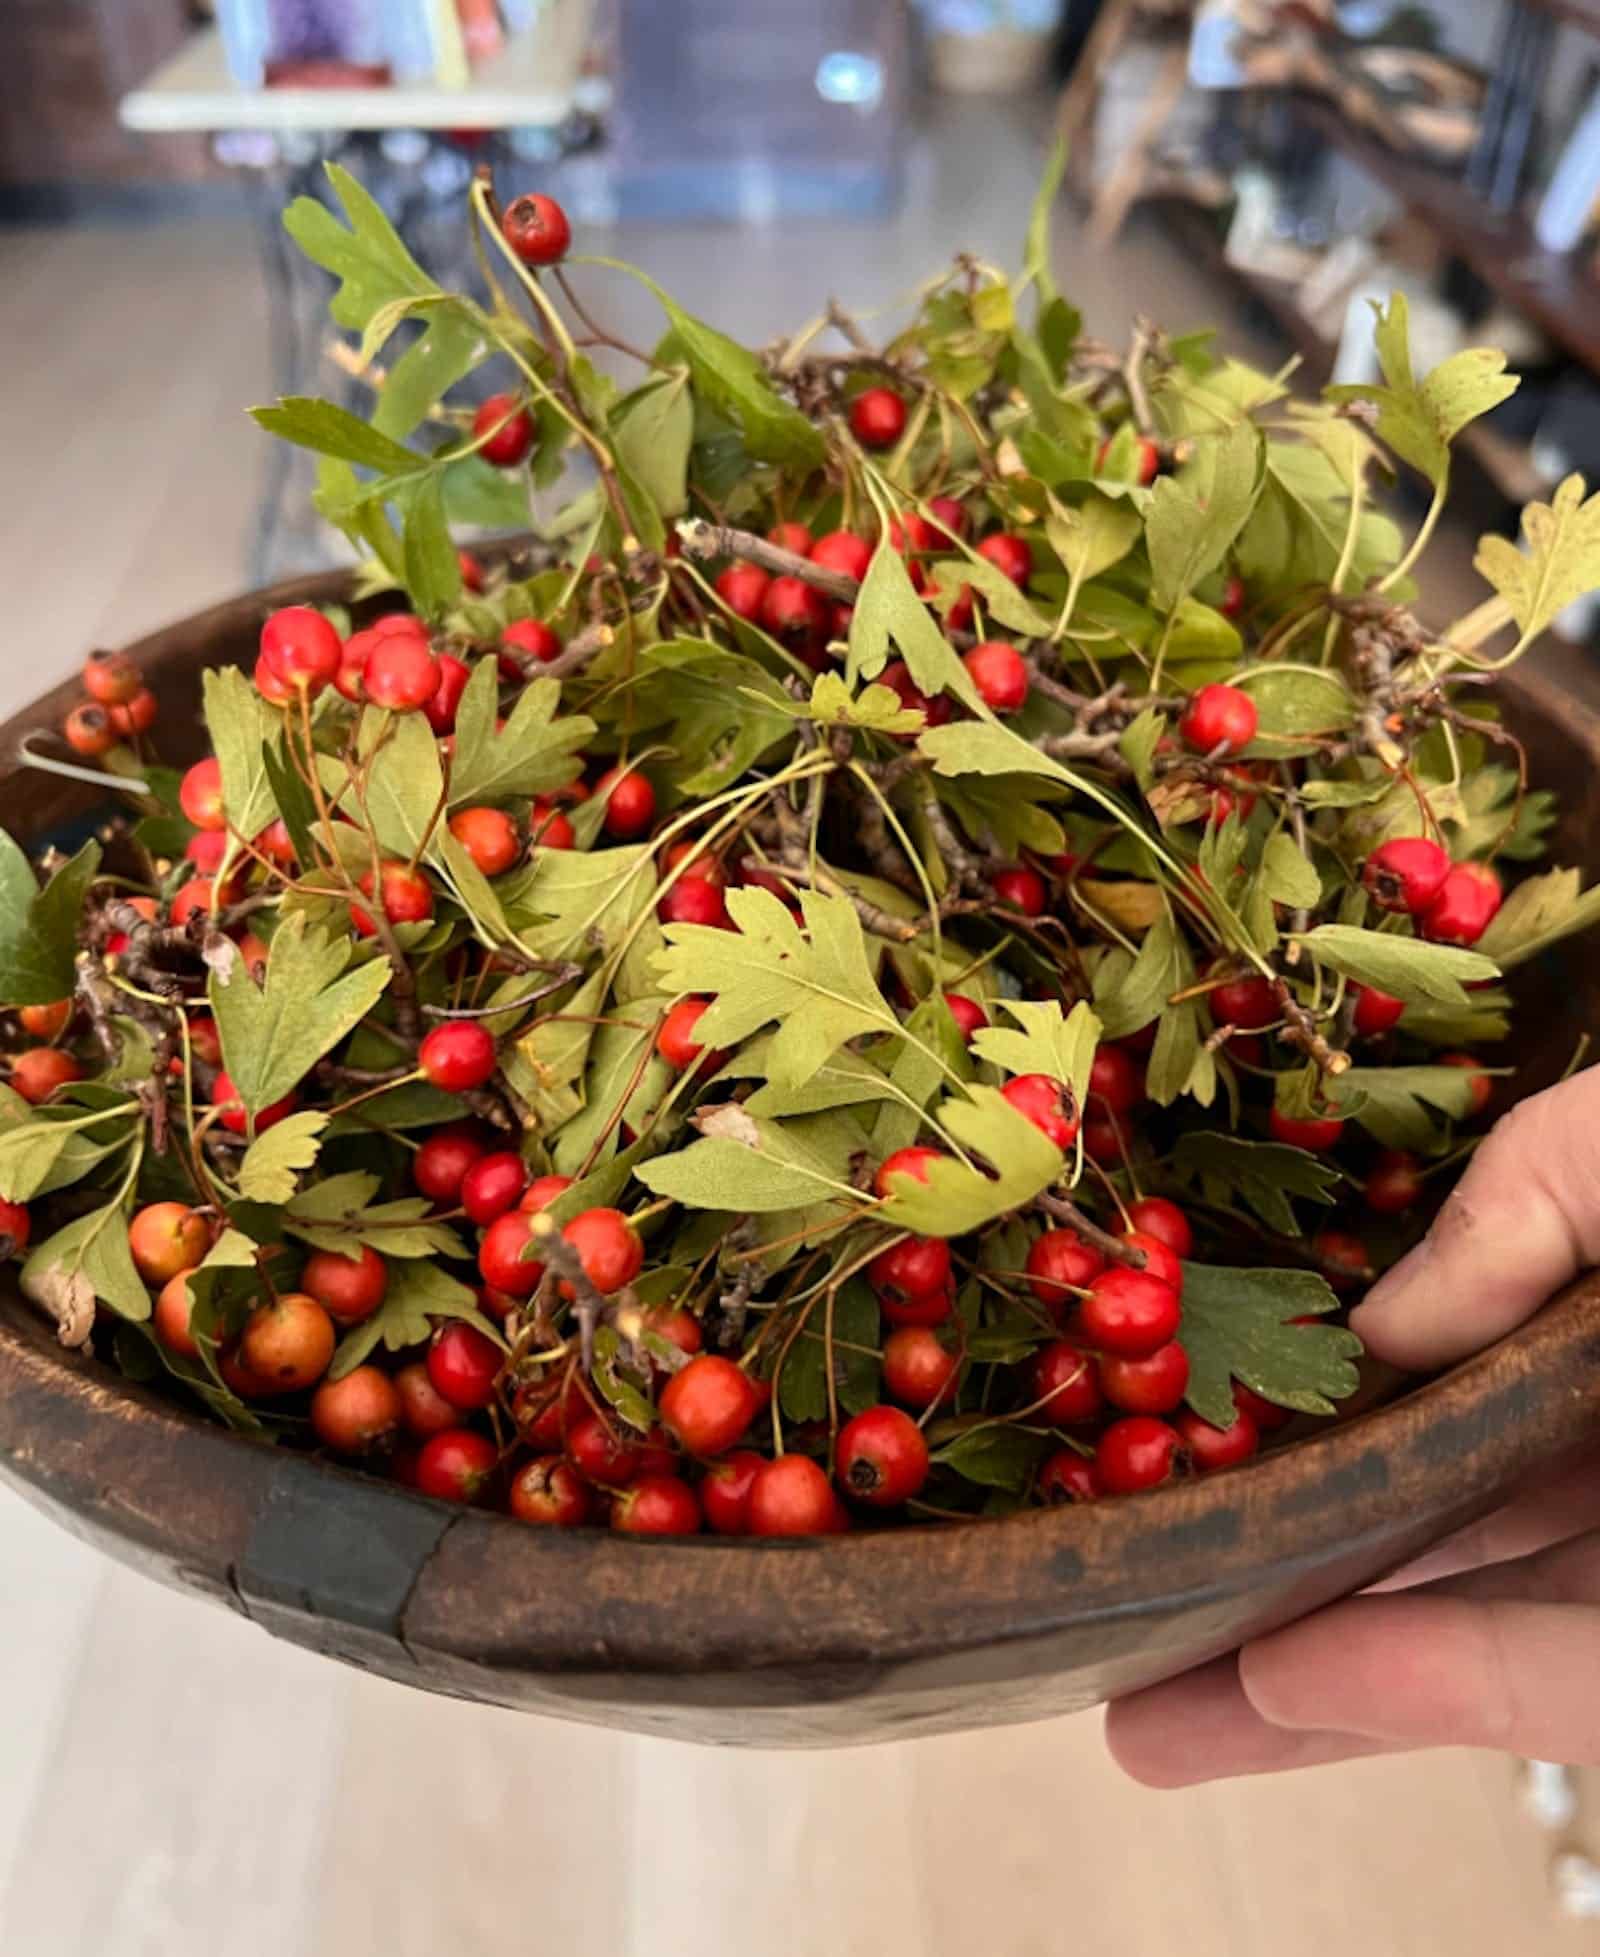 Hand holding bowl of red berries and leaves